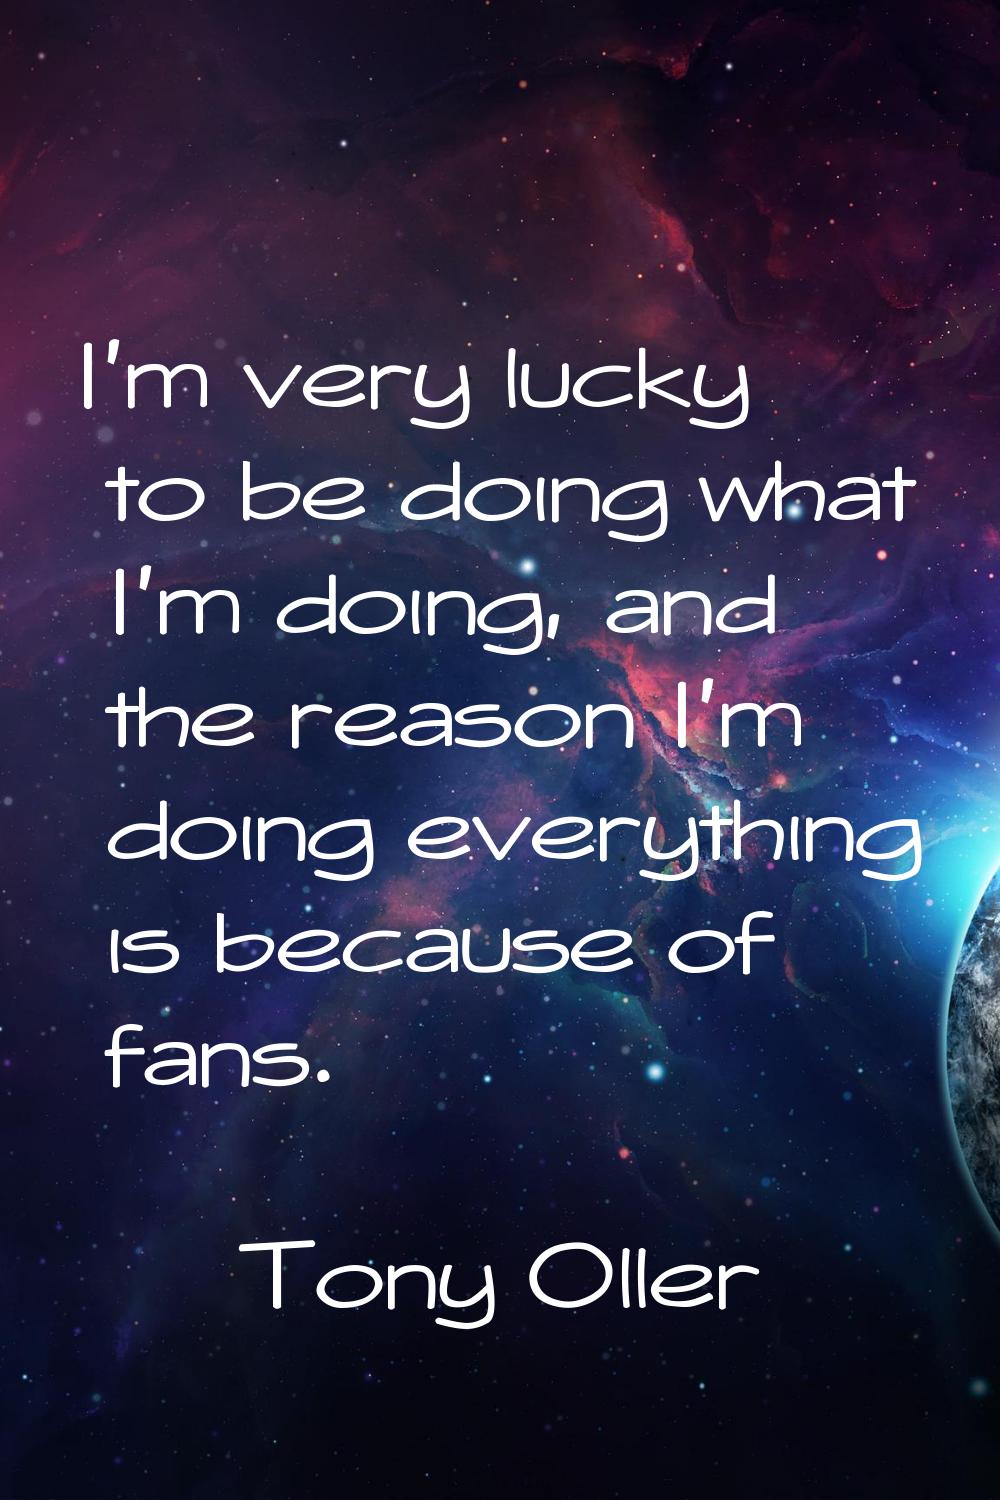 I'm very lucky to be doing what I'm doing, and the reason I'm doing everything is because of fans.